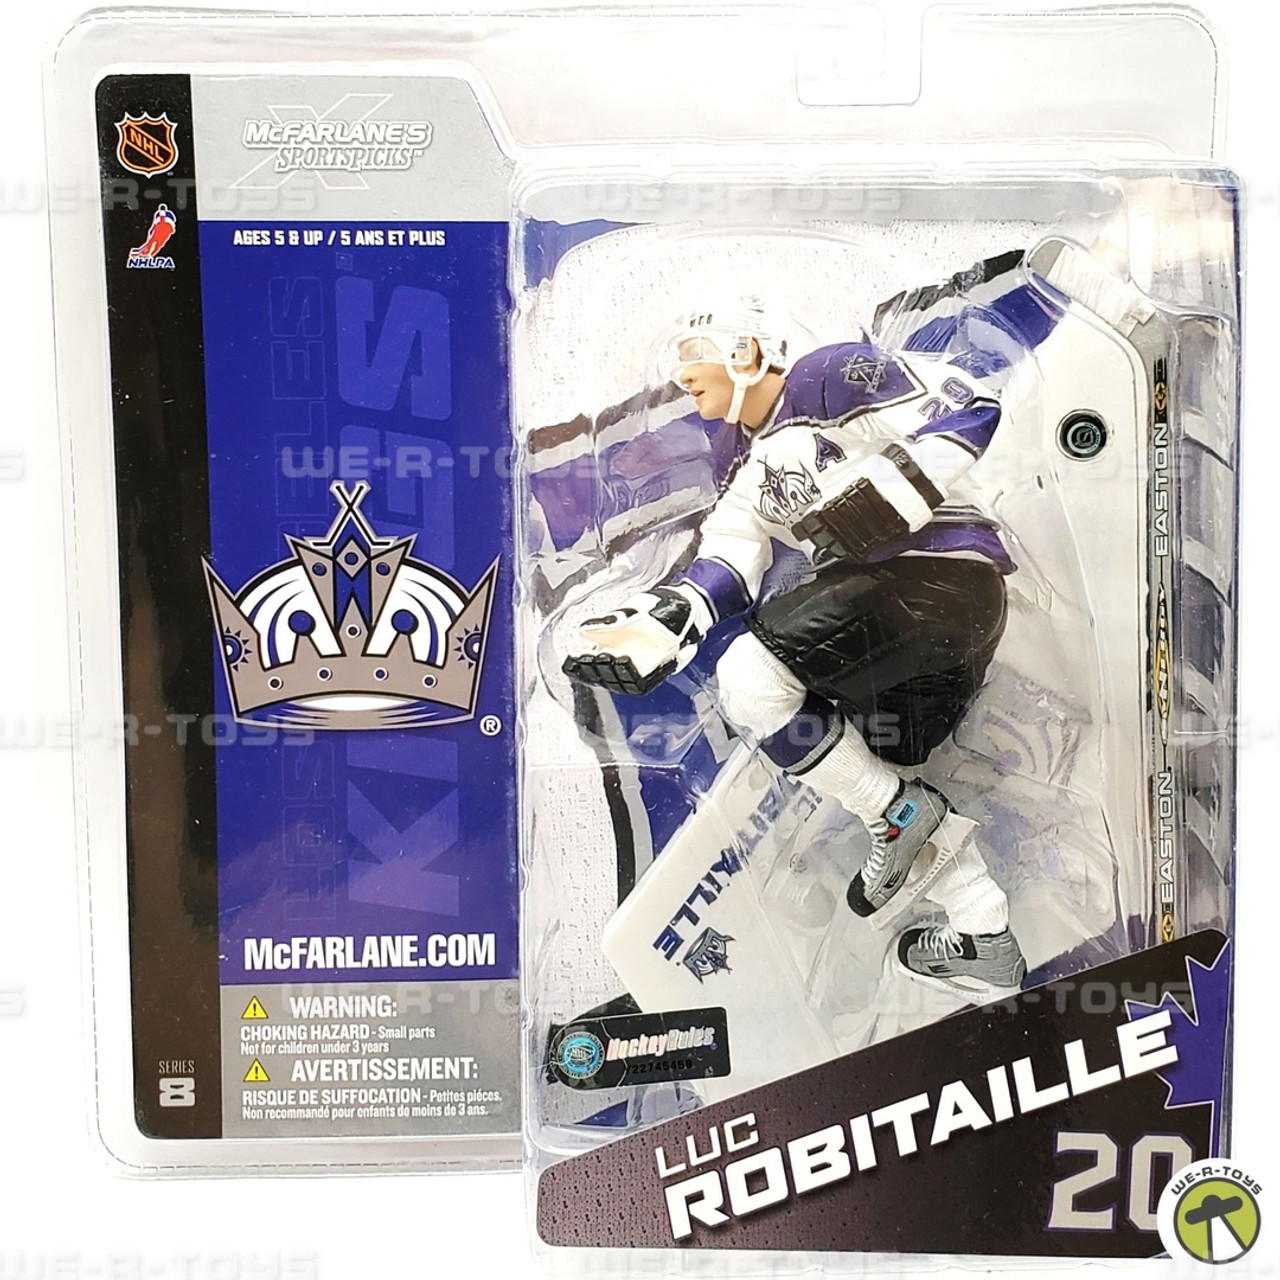 Luc Robitaille #20 Mini Jersey Legends Series Los Angeles Kings Hockey NHL  New